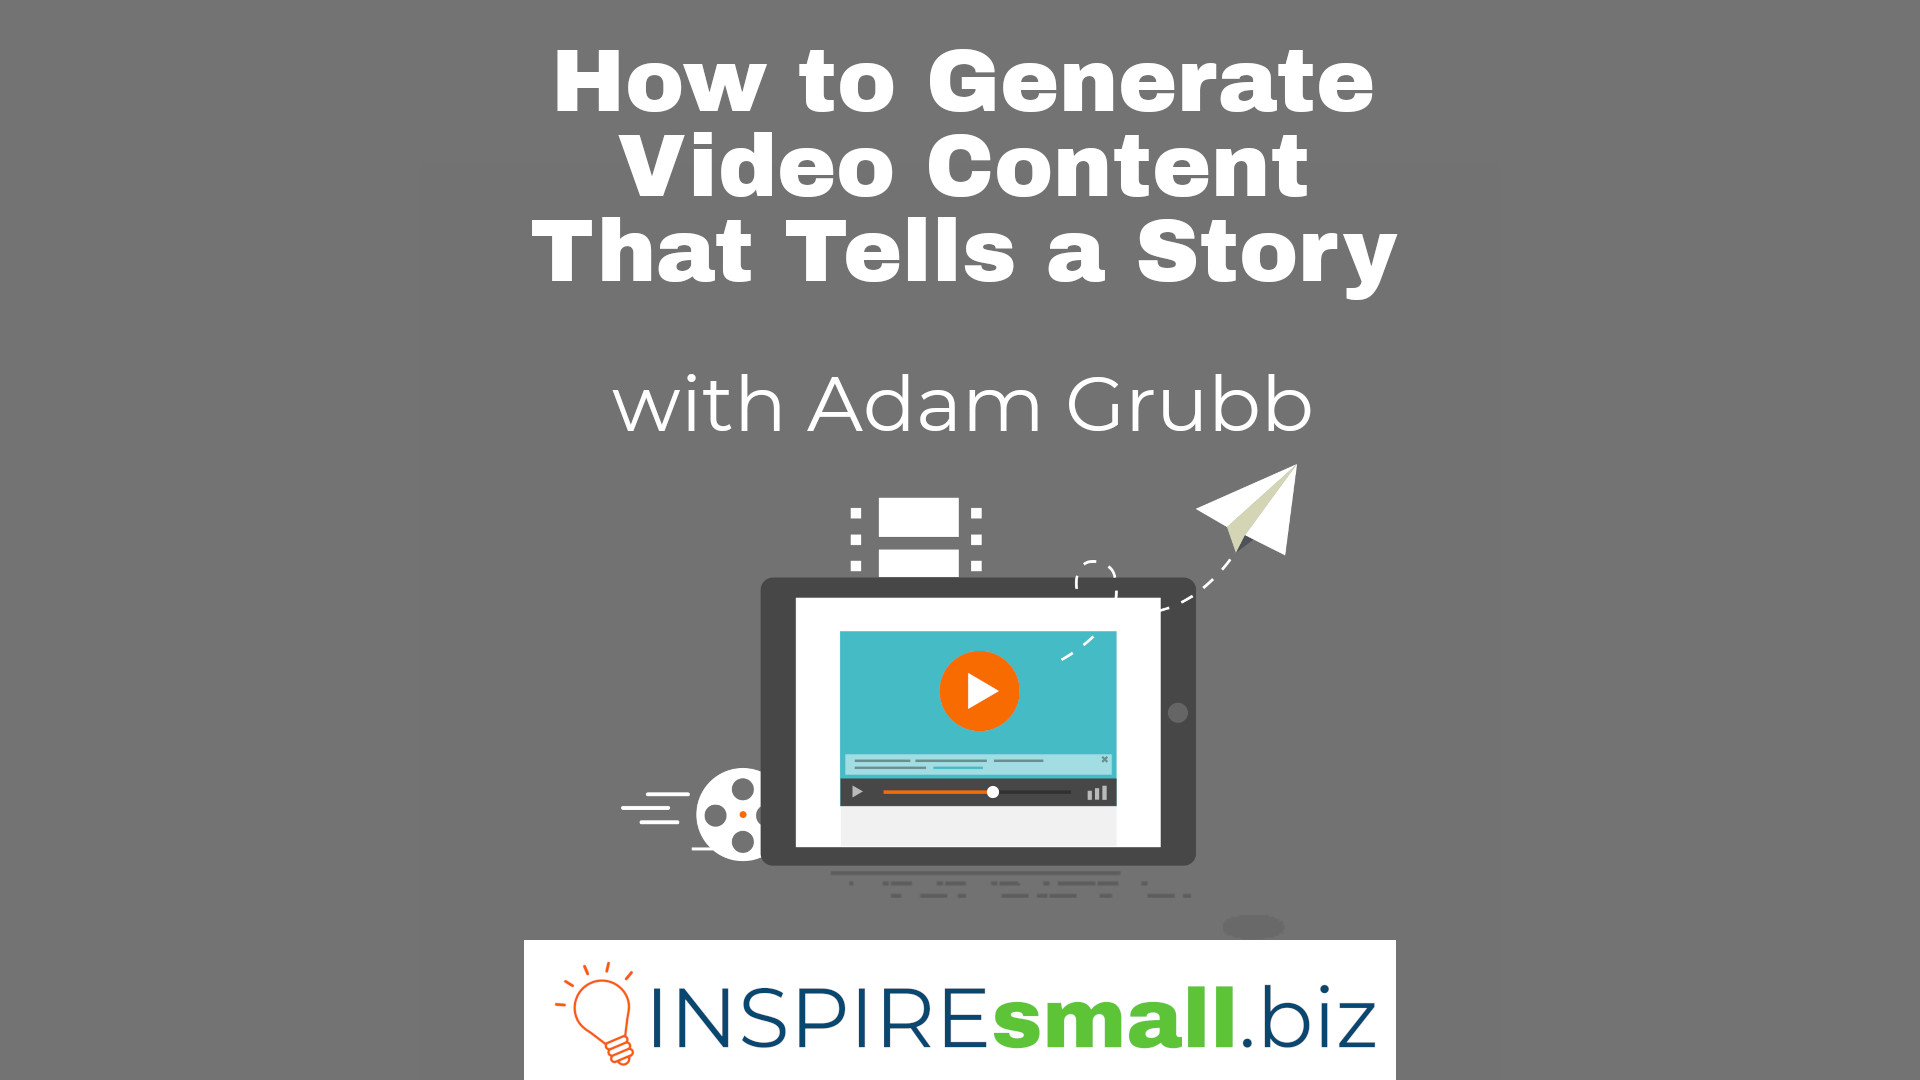 How to Generate Video Content That Tells a Story with Adam Grubb, hosted by INSPIREsmall.biz